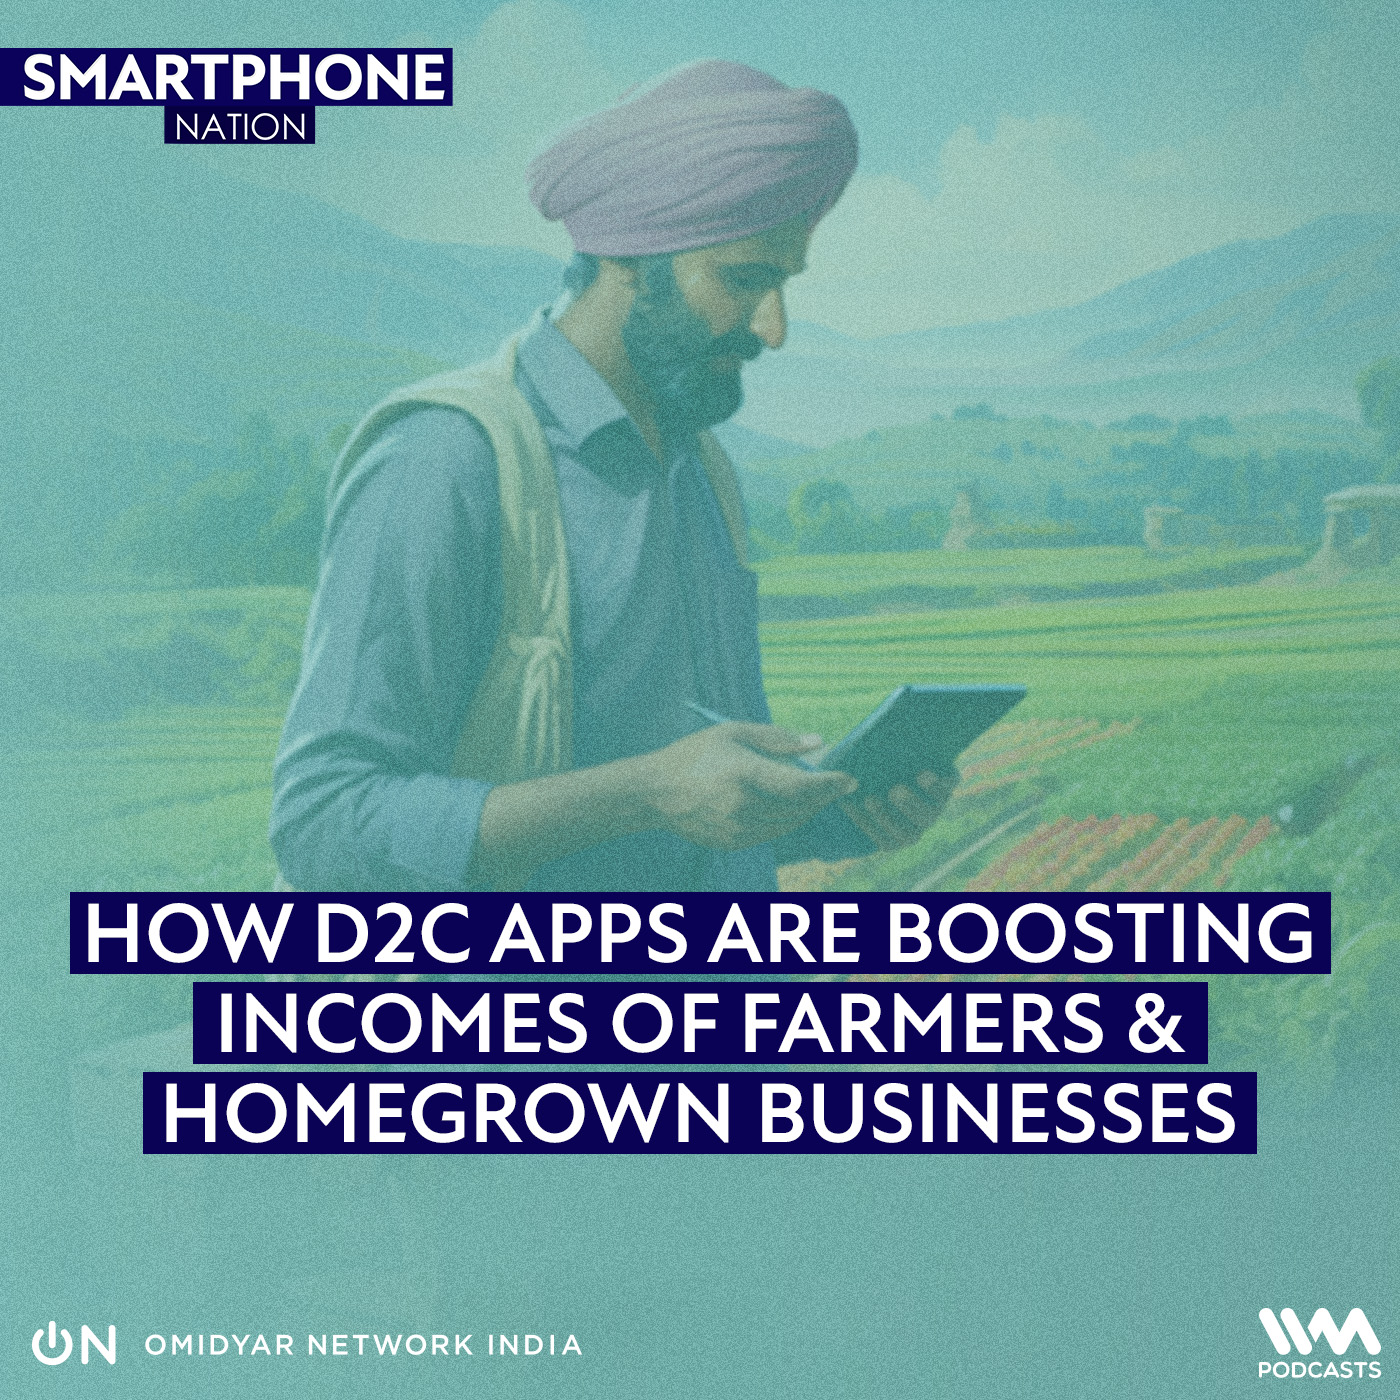 How D2C Apps are Boosting Incomes of Farmers & Homegrown Businesses